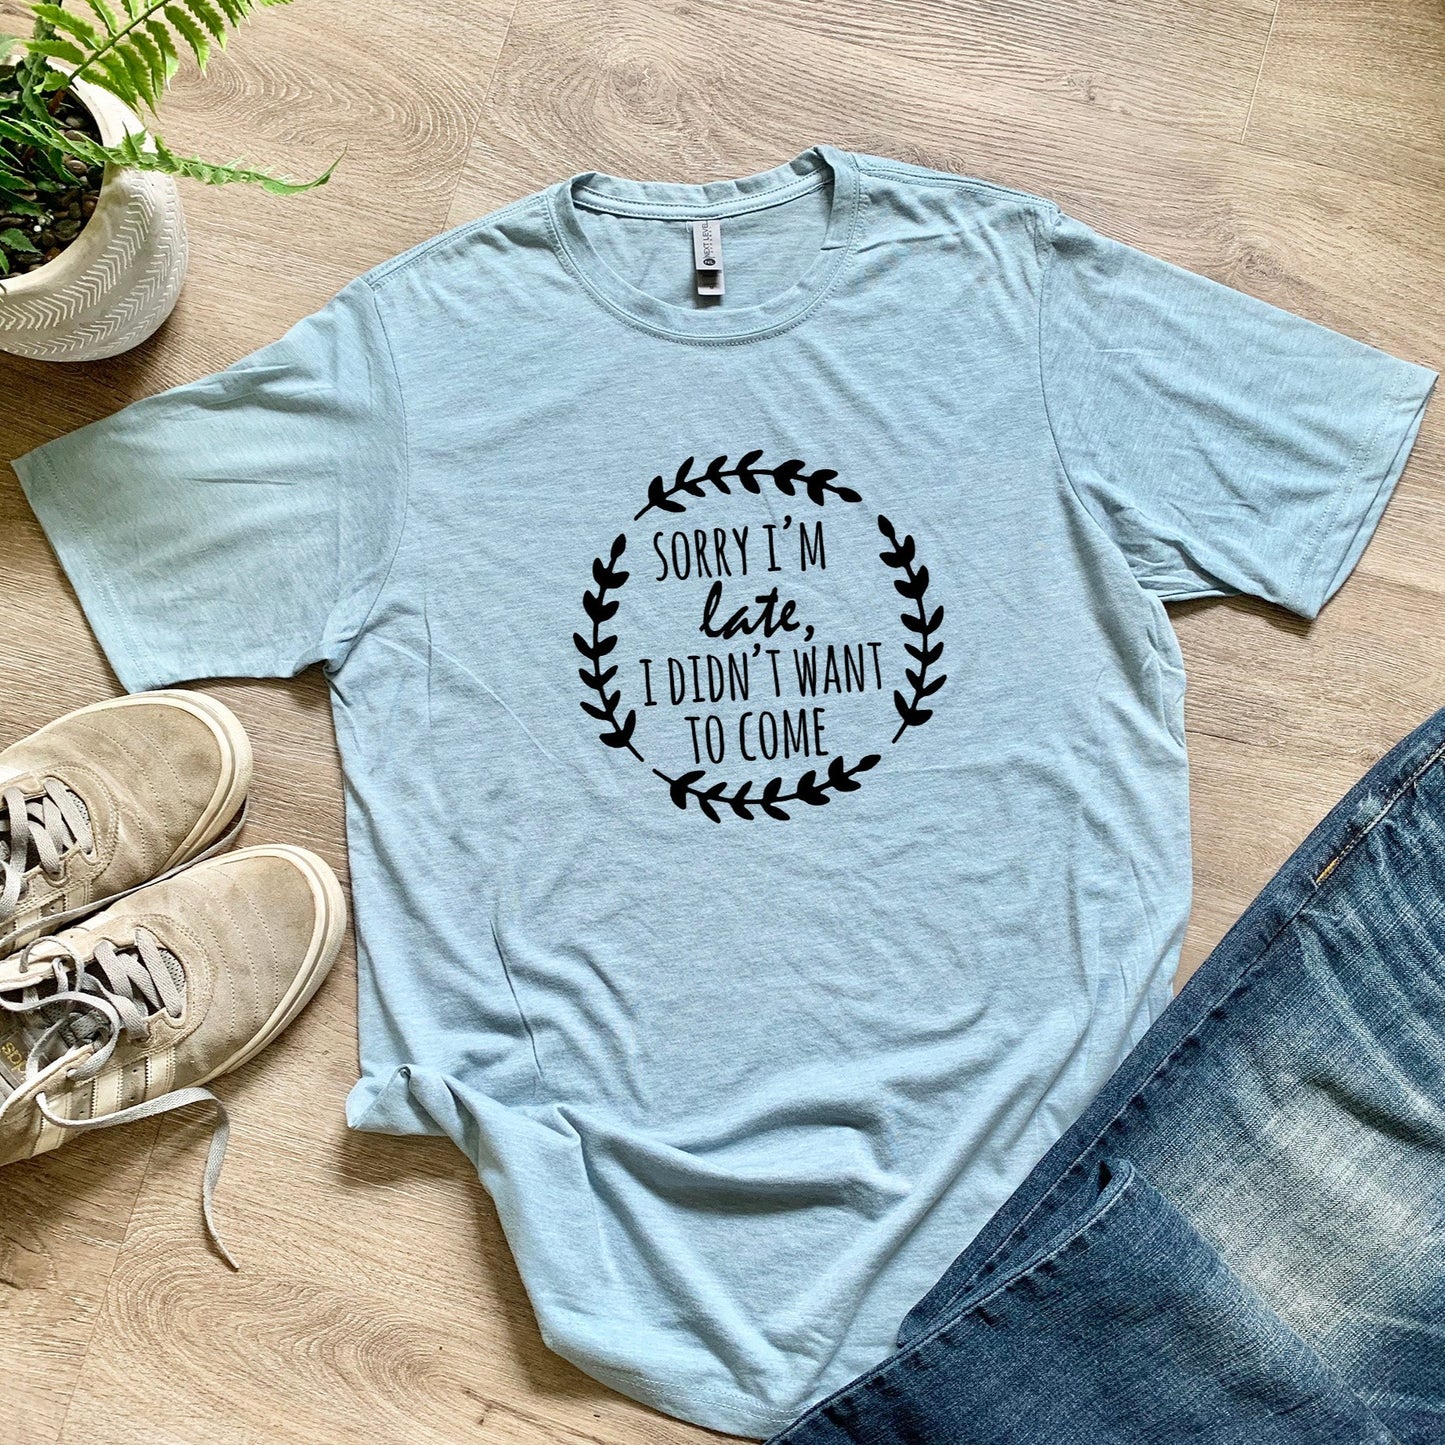 Sorry I'm Late, I Didn't Want To Come - Men's / Unisex Tee - Stonewash Blue or Sage